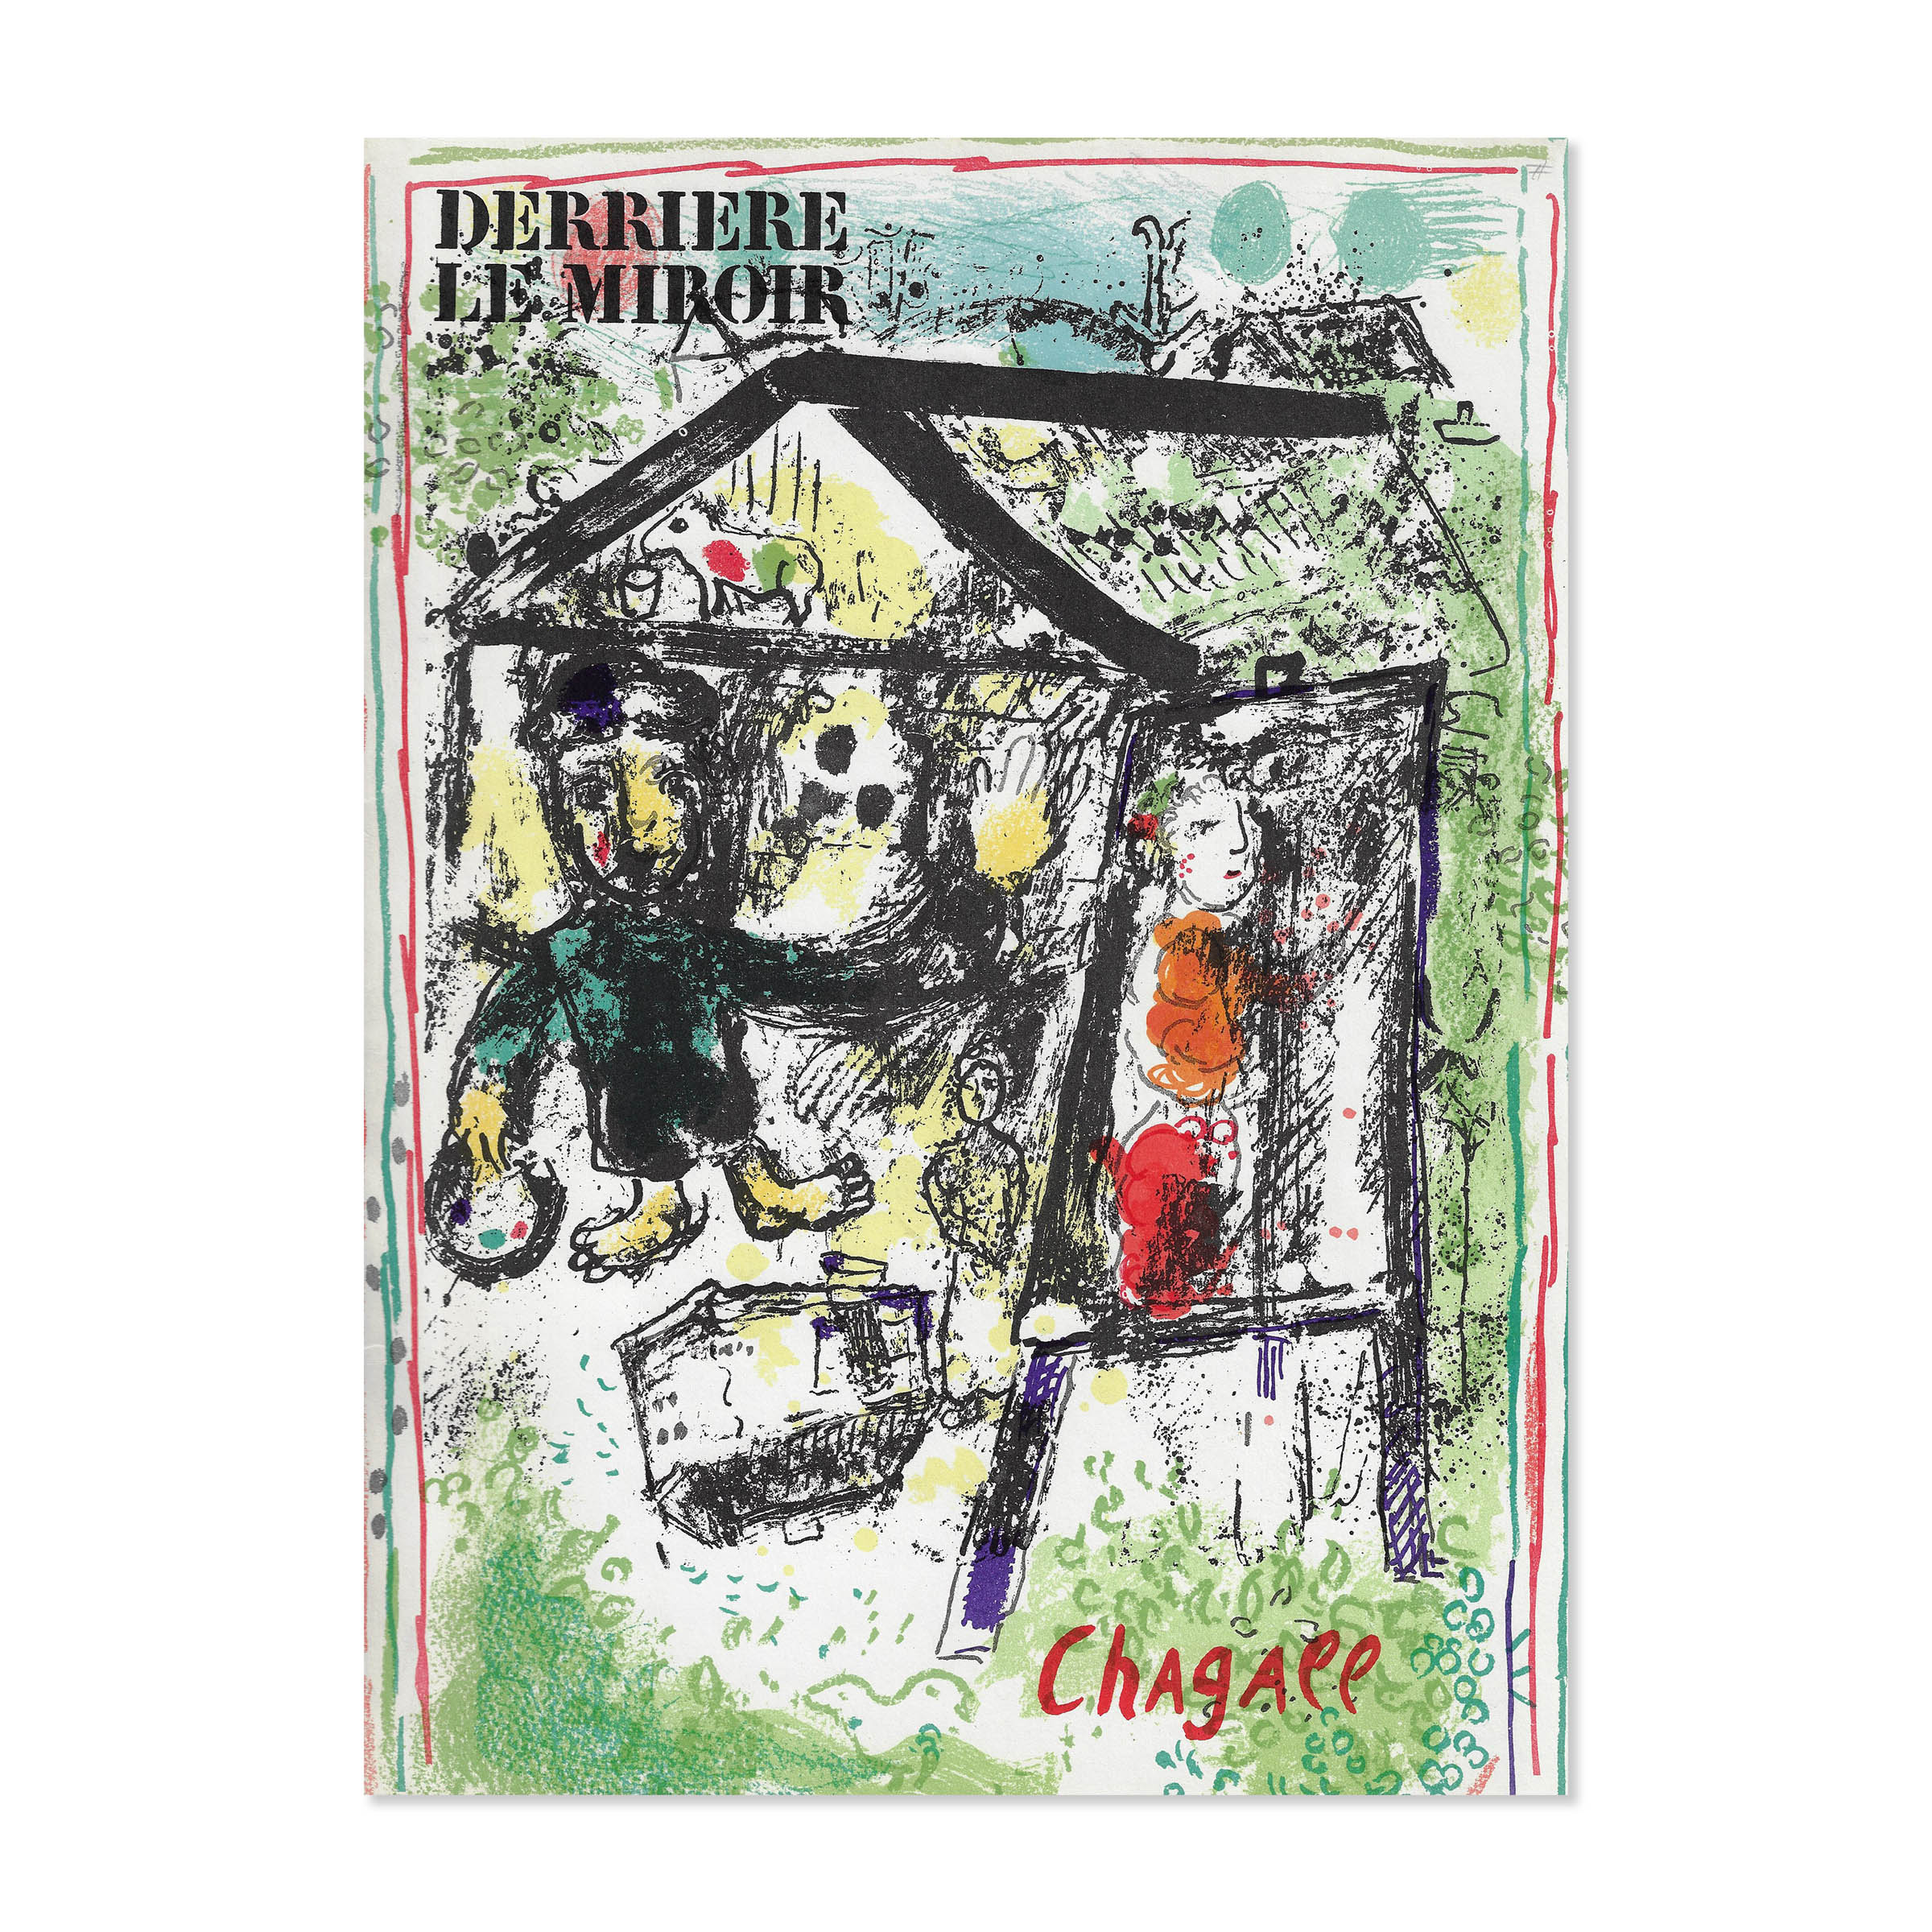 Chagall. DLM. n°182. Cover view